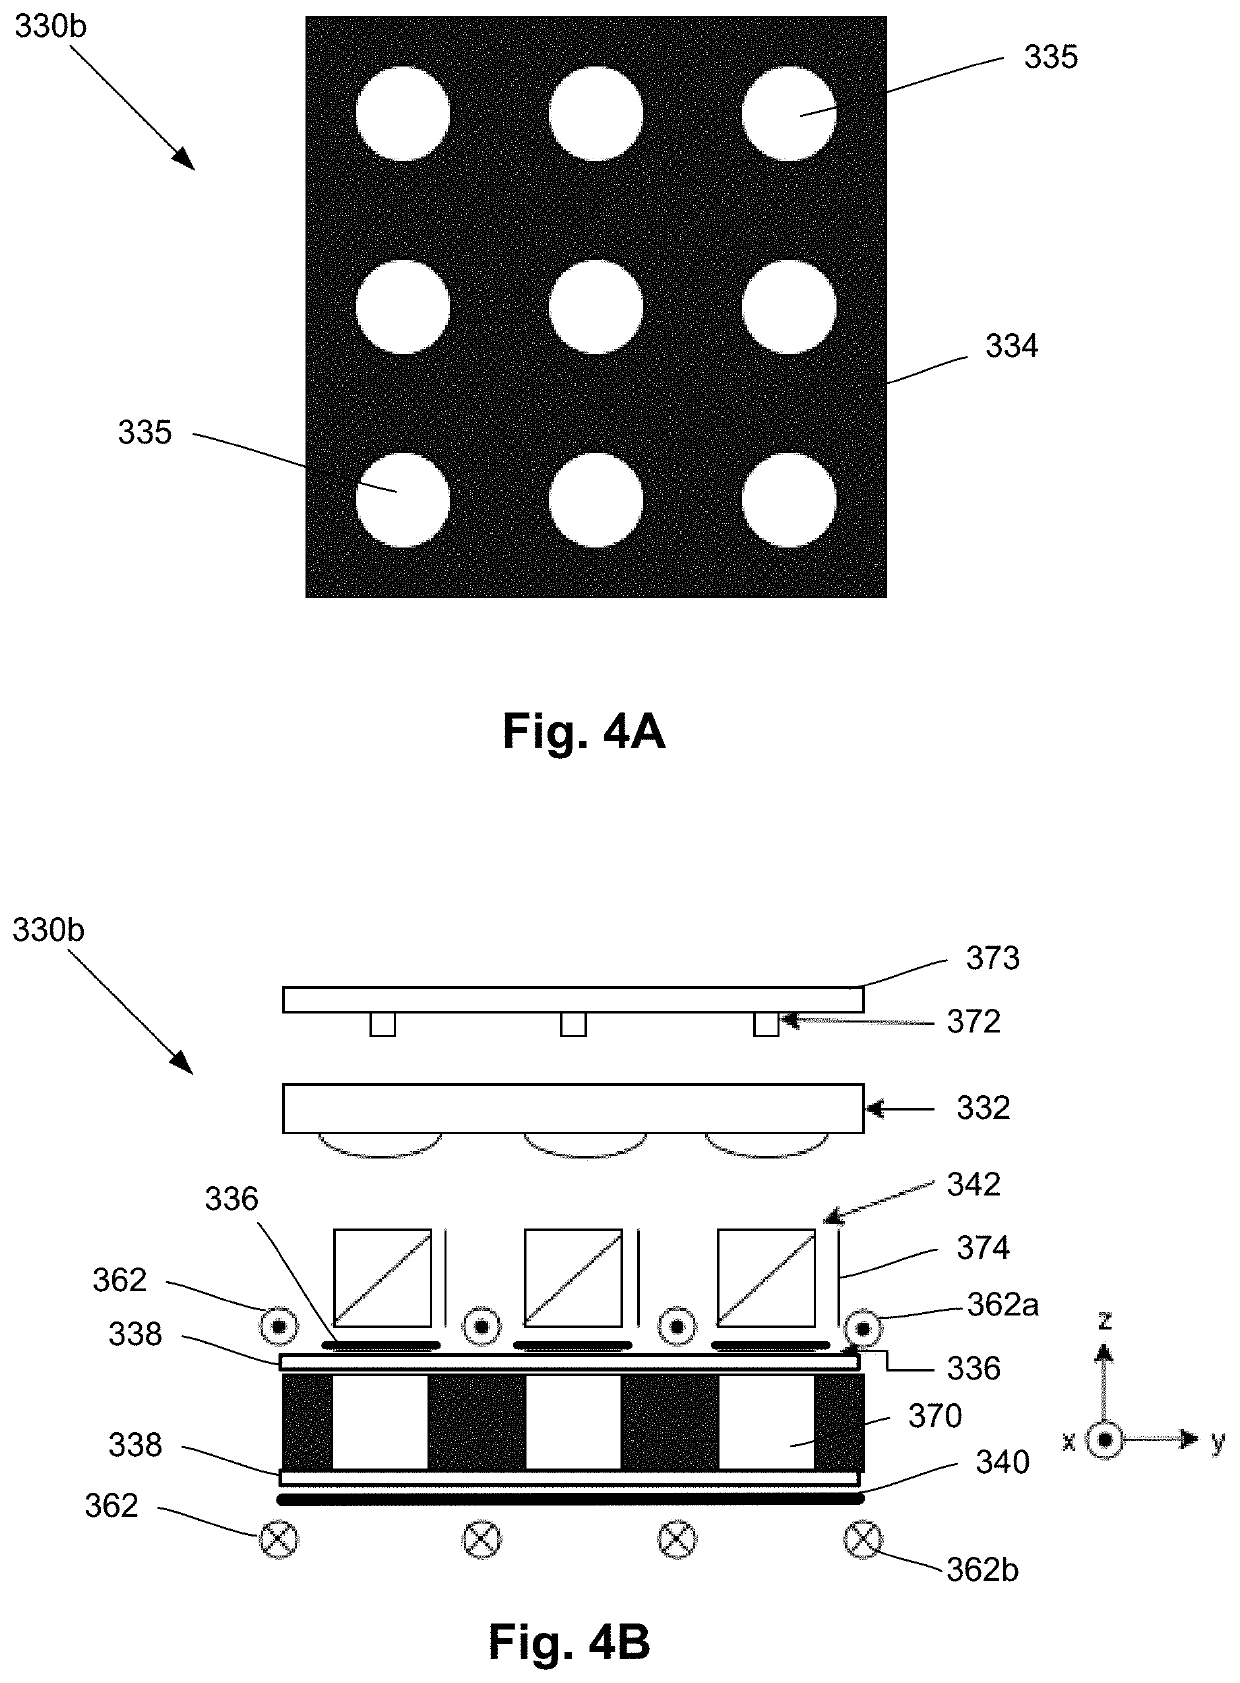 Integrated magnetometer arrays for magnetoencephalography (MEG) detection systems and methods